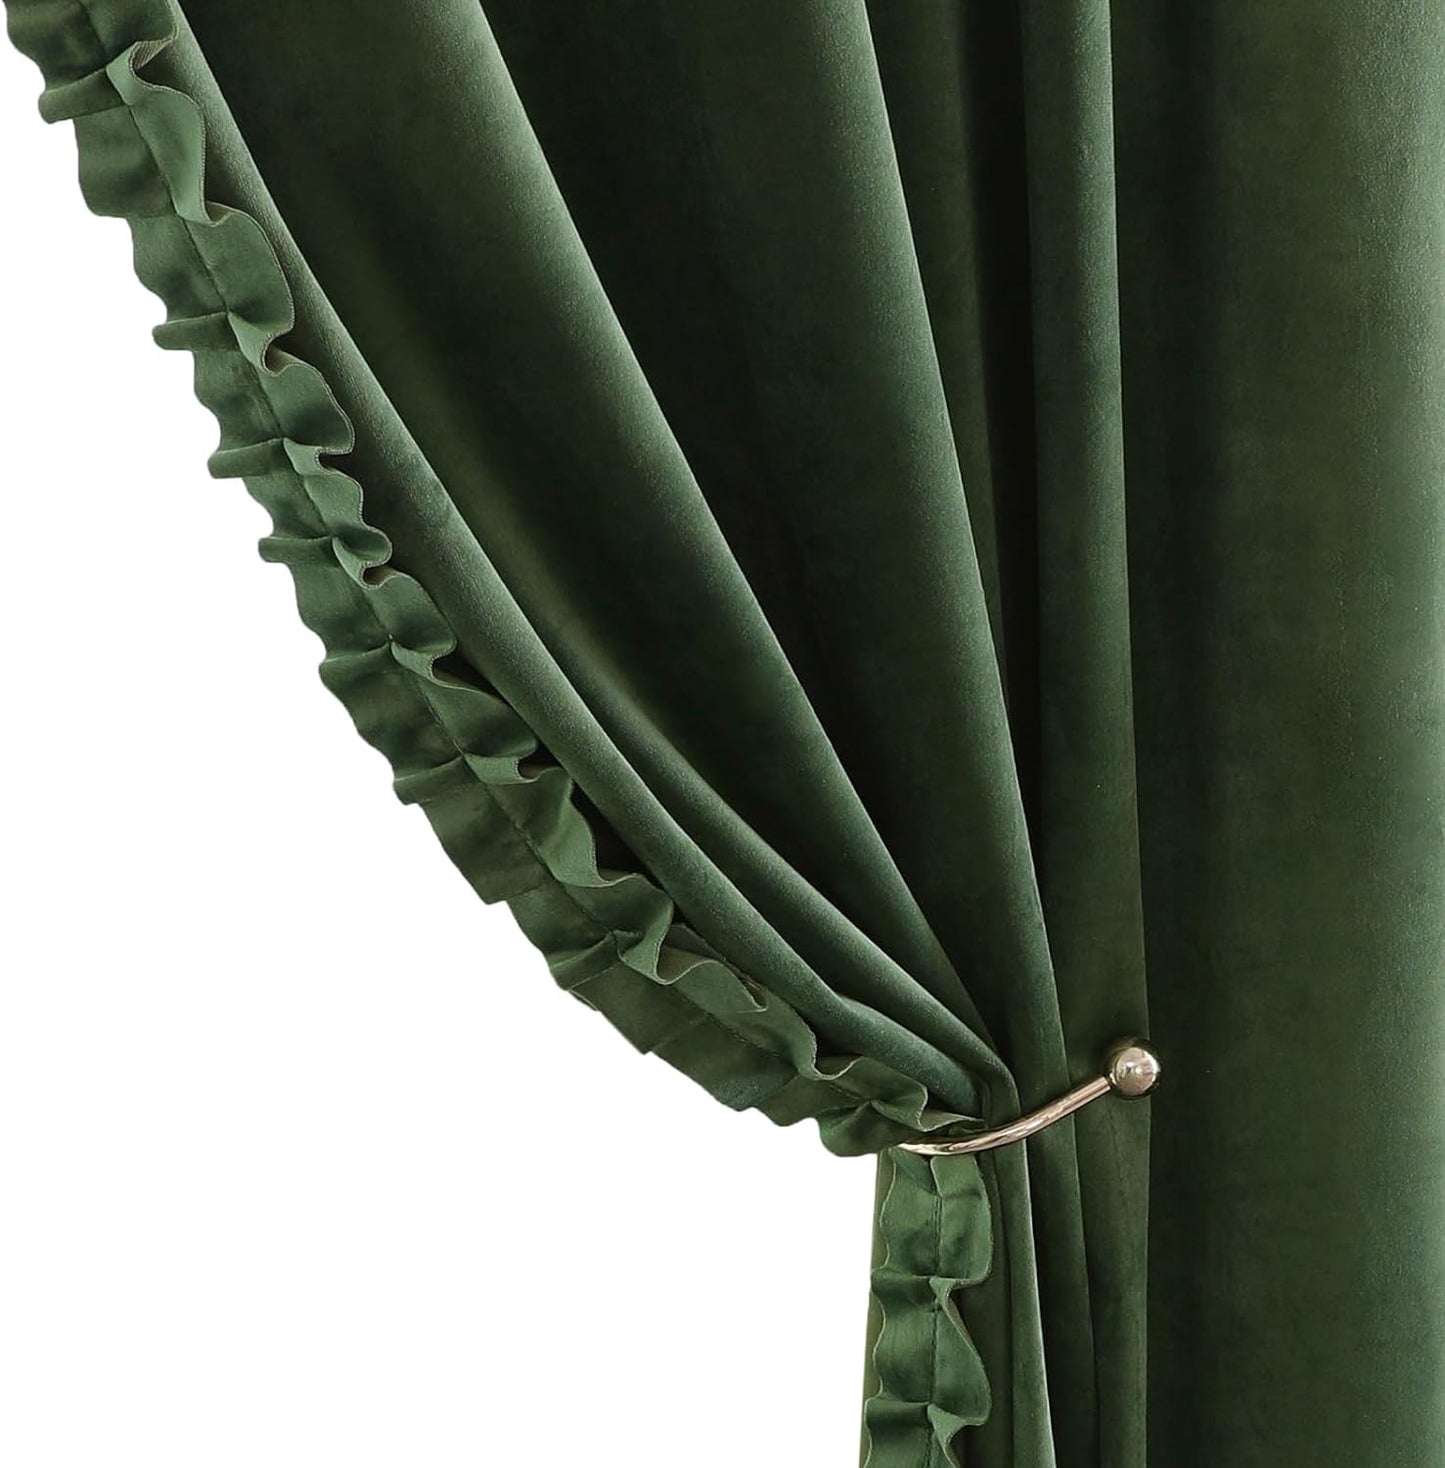 Benedeco Green Velvet Curtains for Bedroom Window, Super Soft Luxury Drapes, Room Darkening Thermal Insulated Rod Pocket Curtain for Living Room, W52 by L84 Inches, 2 Panels  Benedeco Green-Ruffle W52 * L63 | 2 Panels 